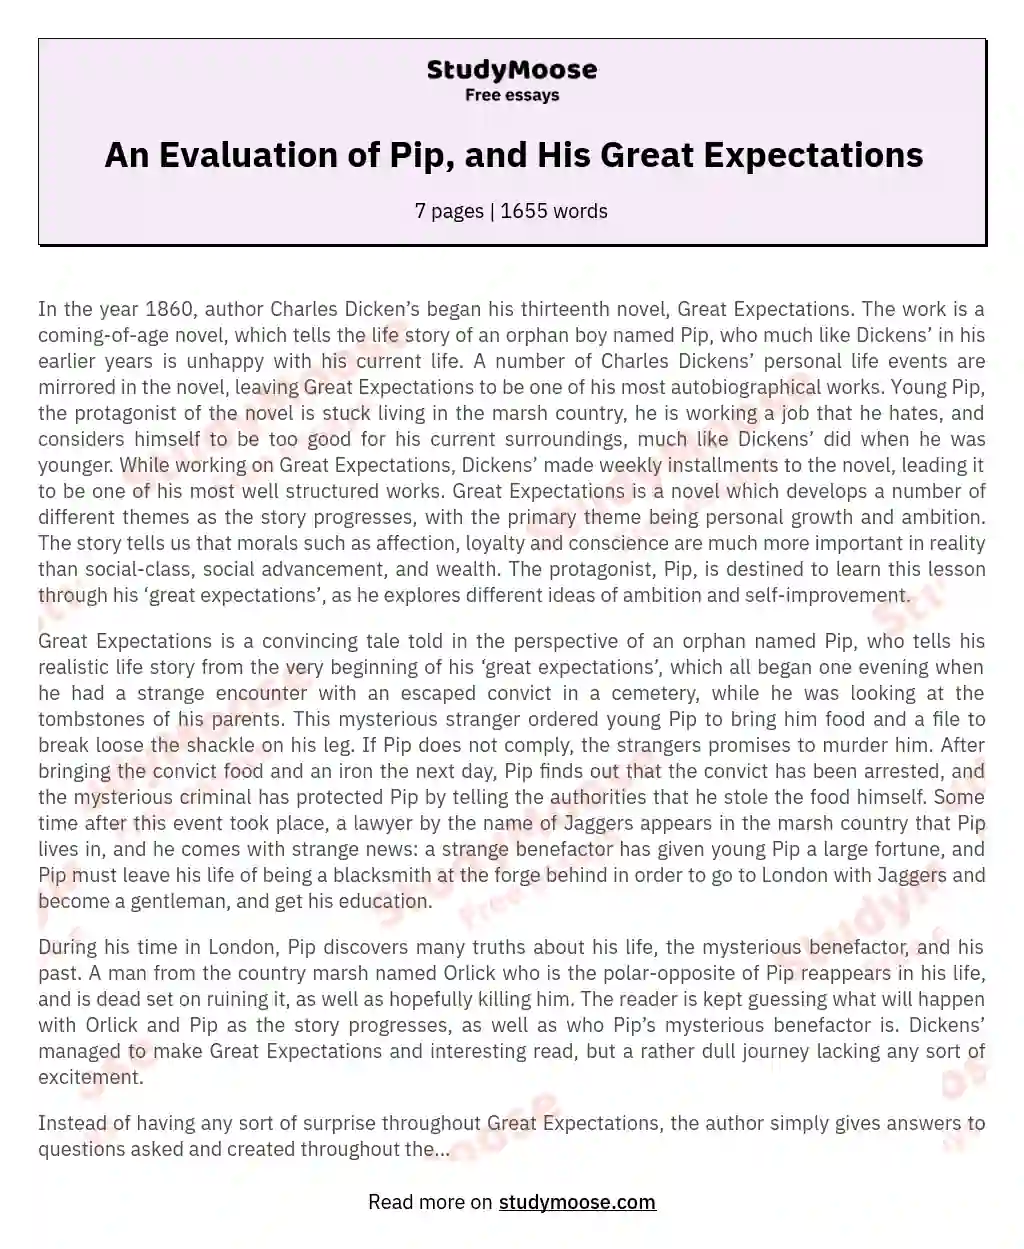 An Evaluation of Pip, and His Great Expectations